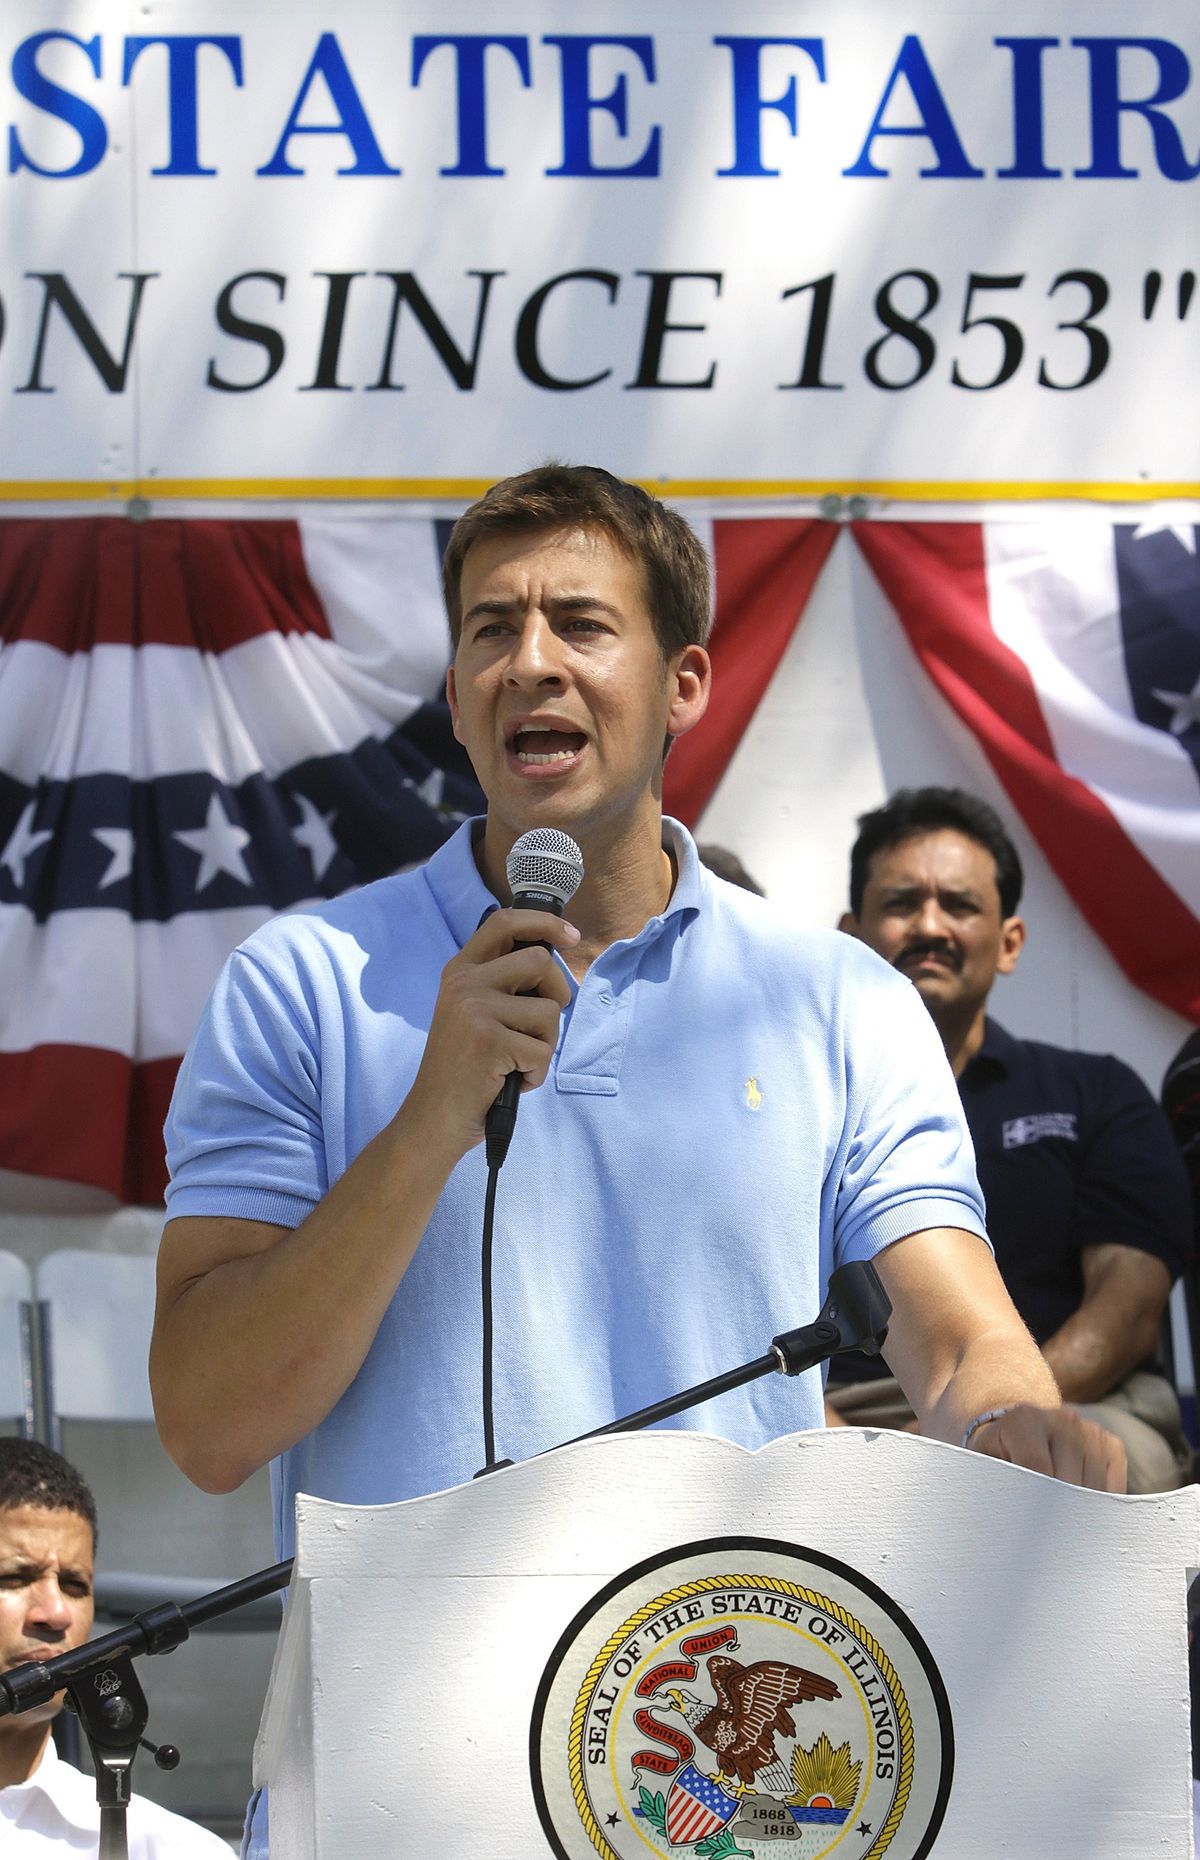 Then Democratic U.S. Senate candidate Alexi Giannoulias speaks during a rally on Democrats Day at the Illinois State Fair in 2010.